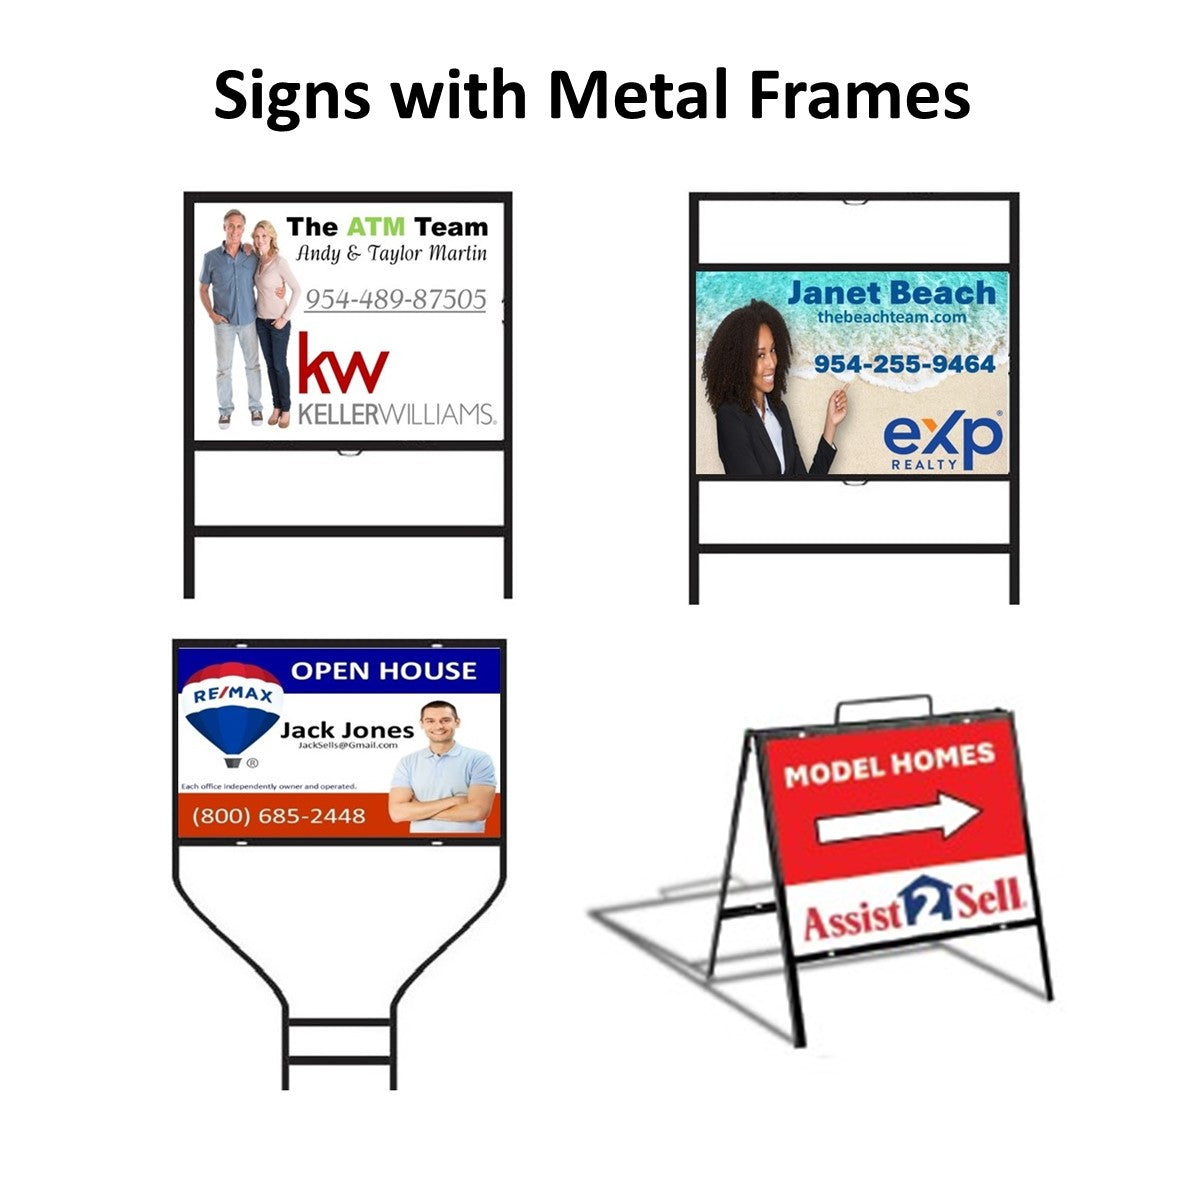 Signs with Metal Frames